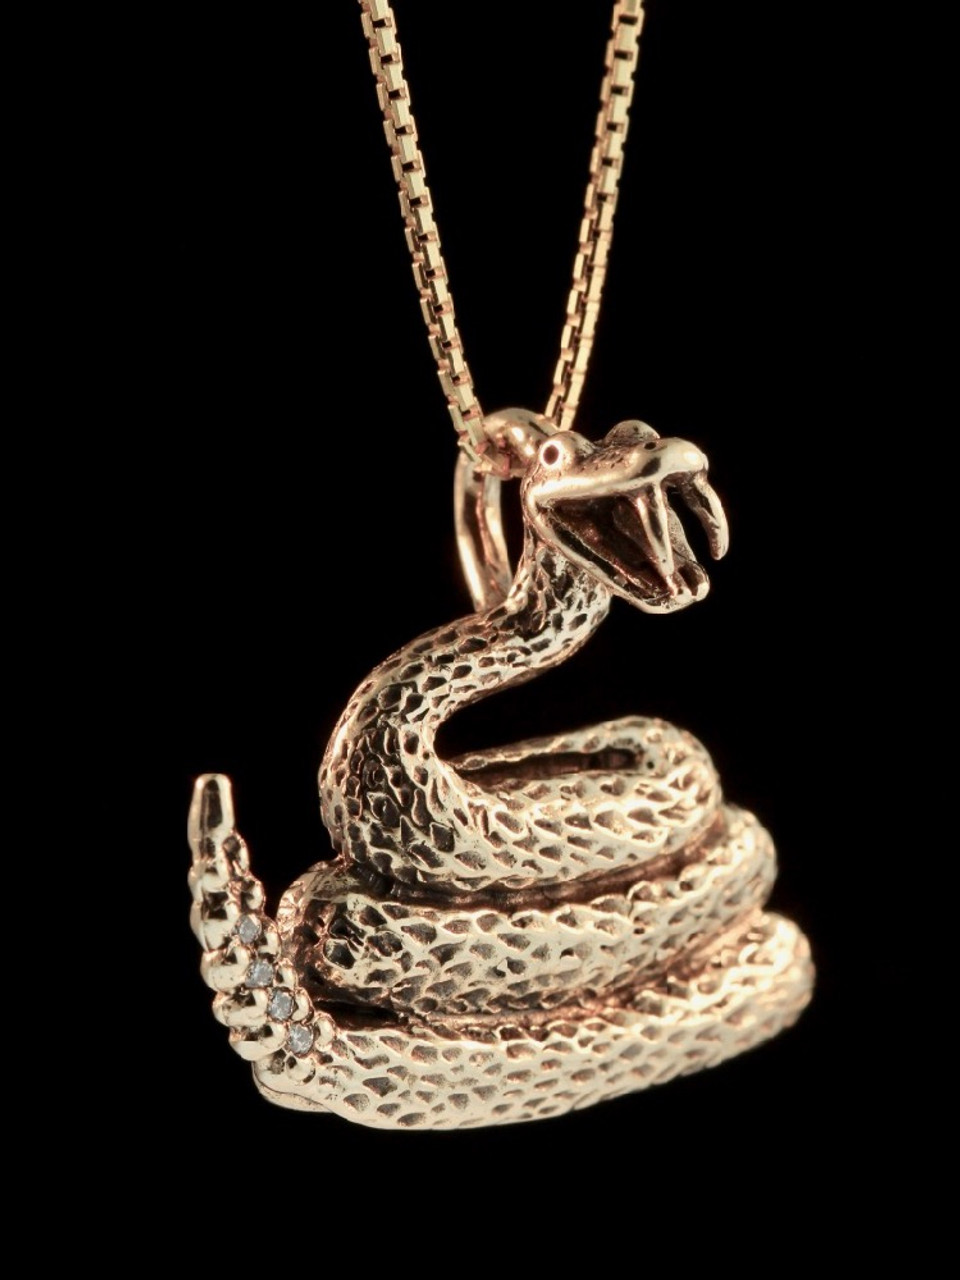 Real Rattlesnake Rattle & Fangs Pendant Necklace Chain Biker | Etsy |  Chains necklace, Pendant necklace, Necklace